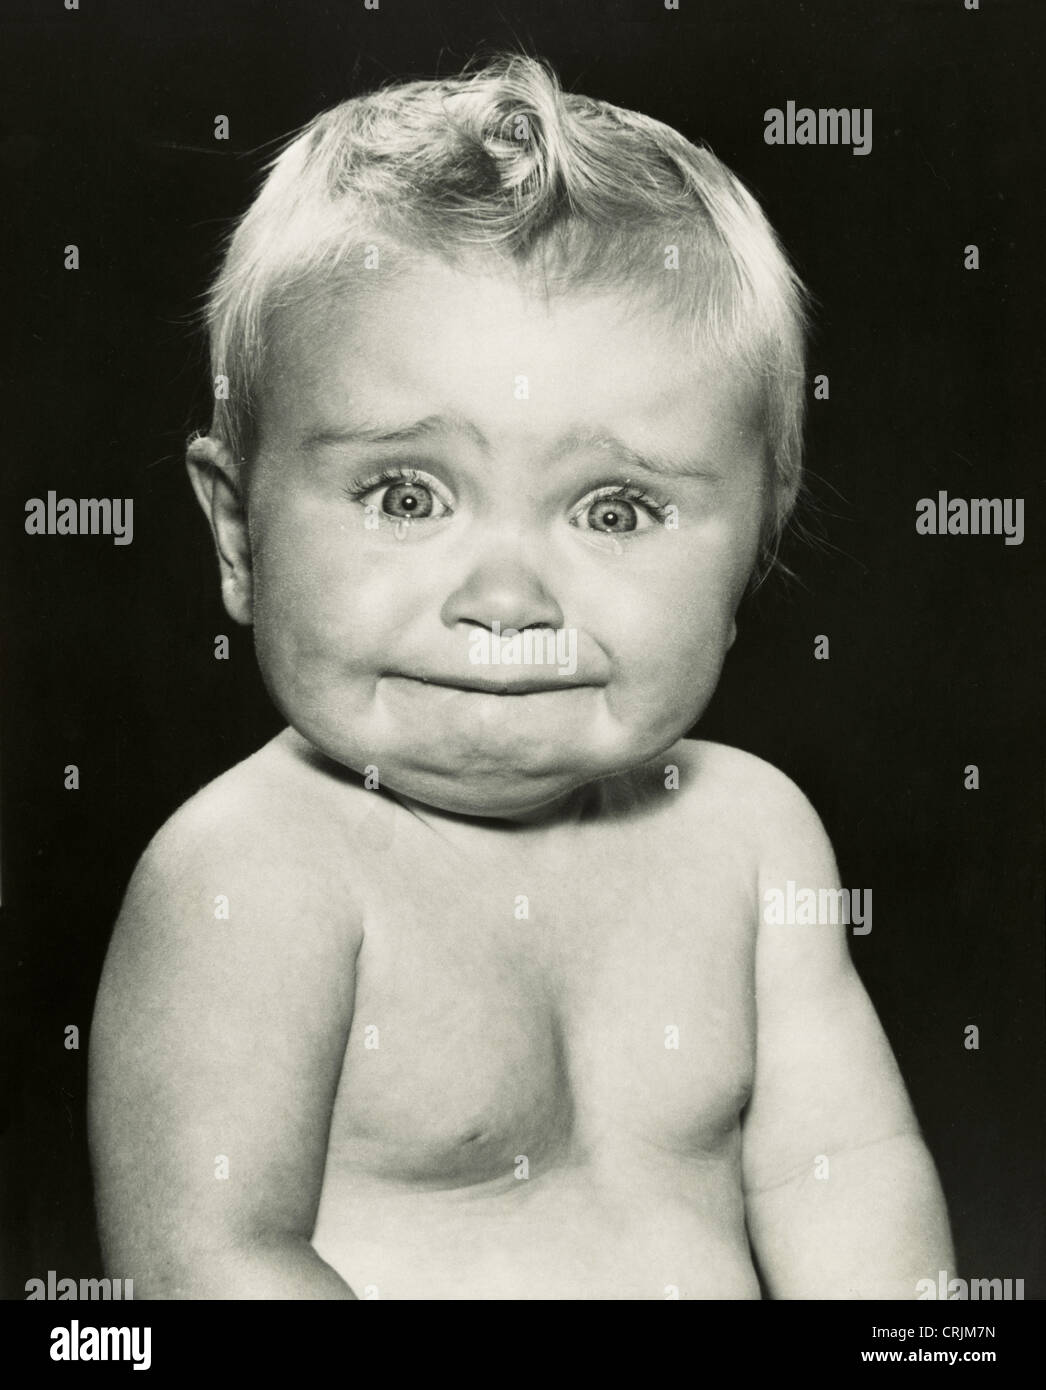 Portrait of baby crying Stock Photo